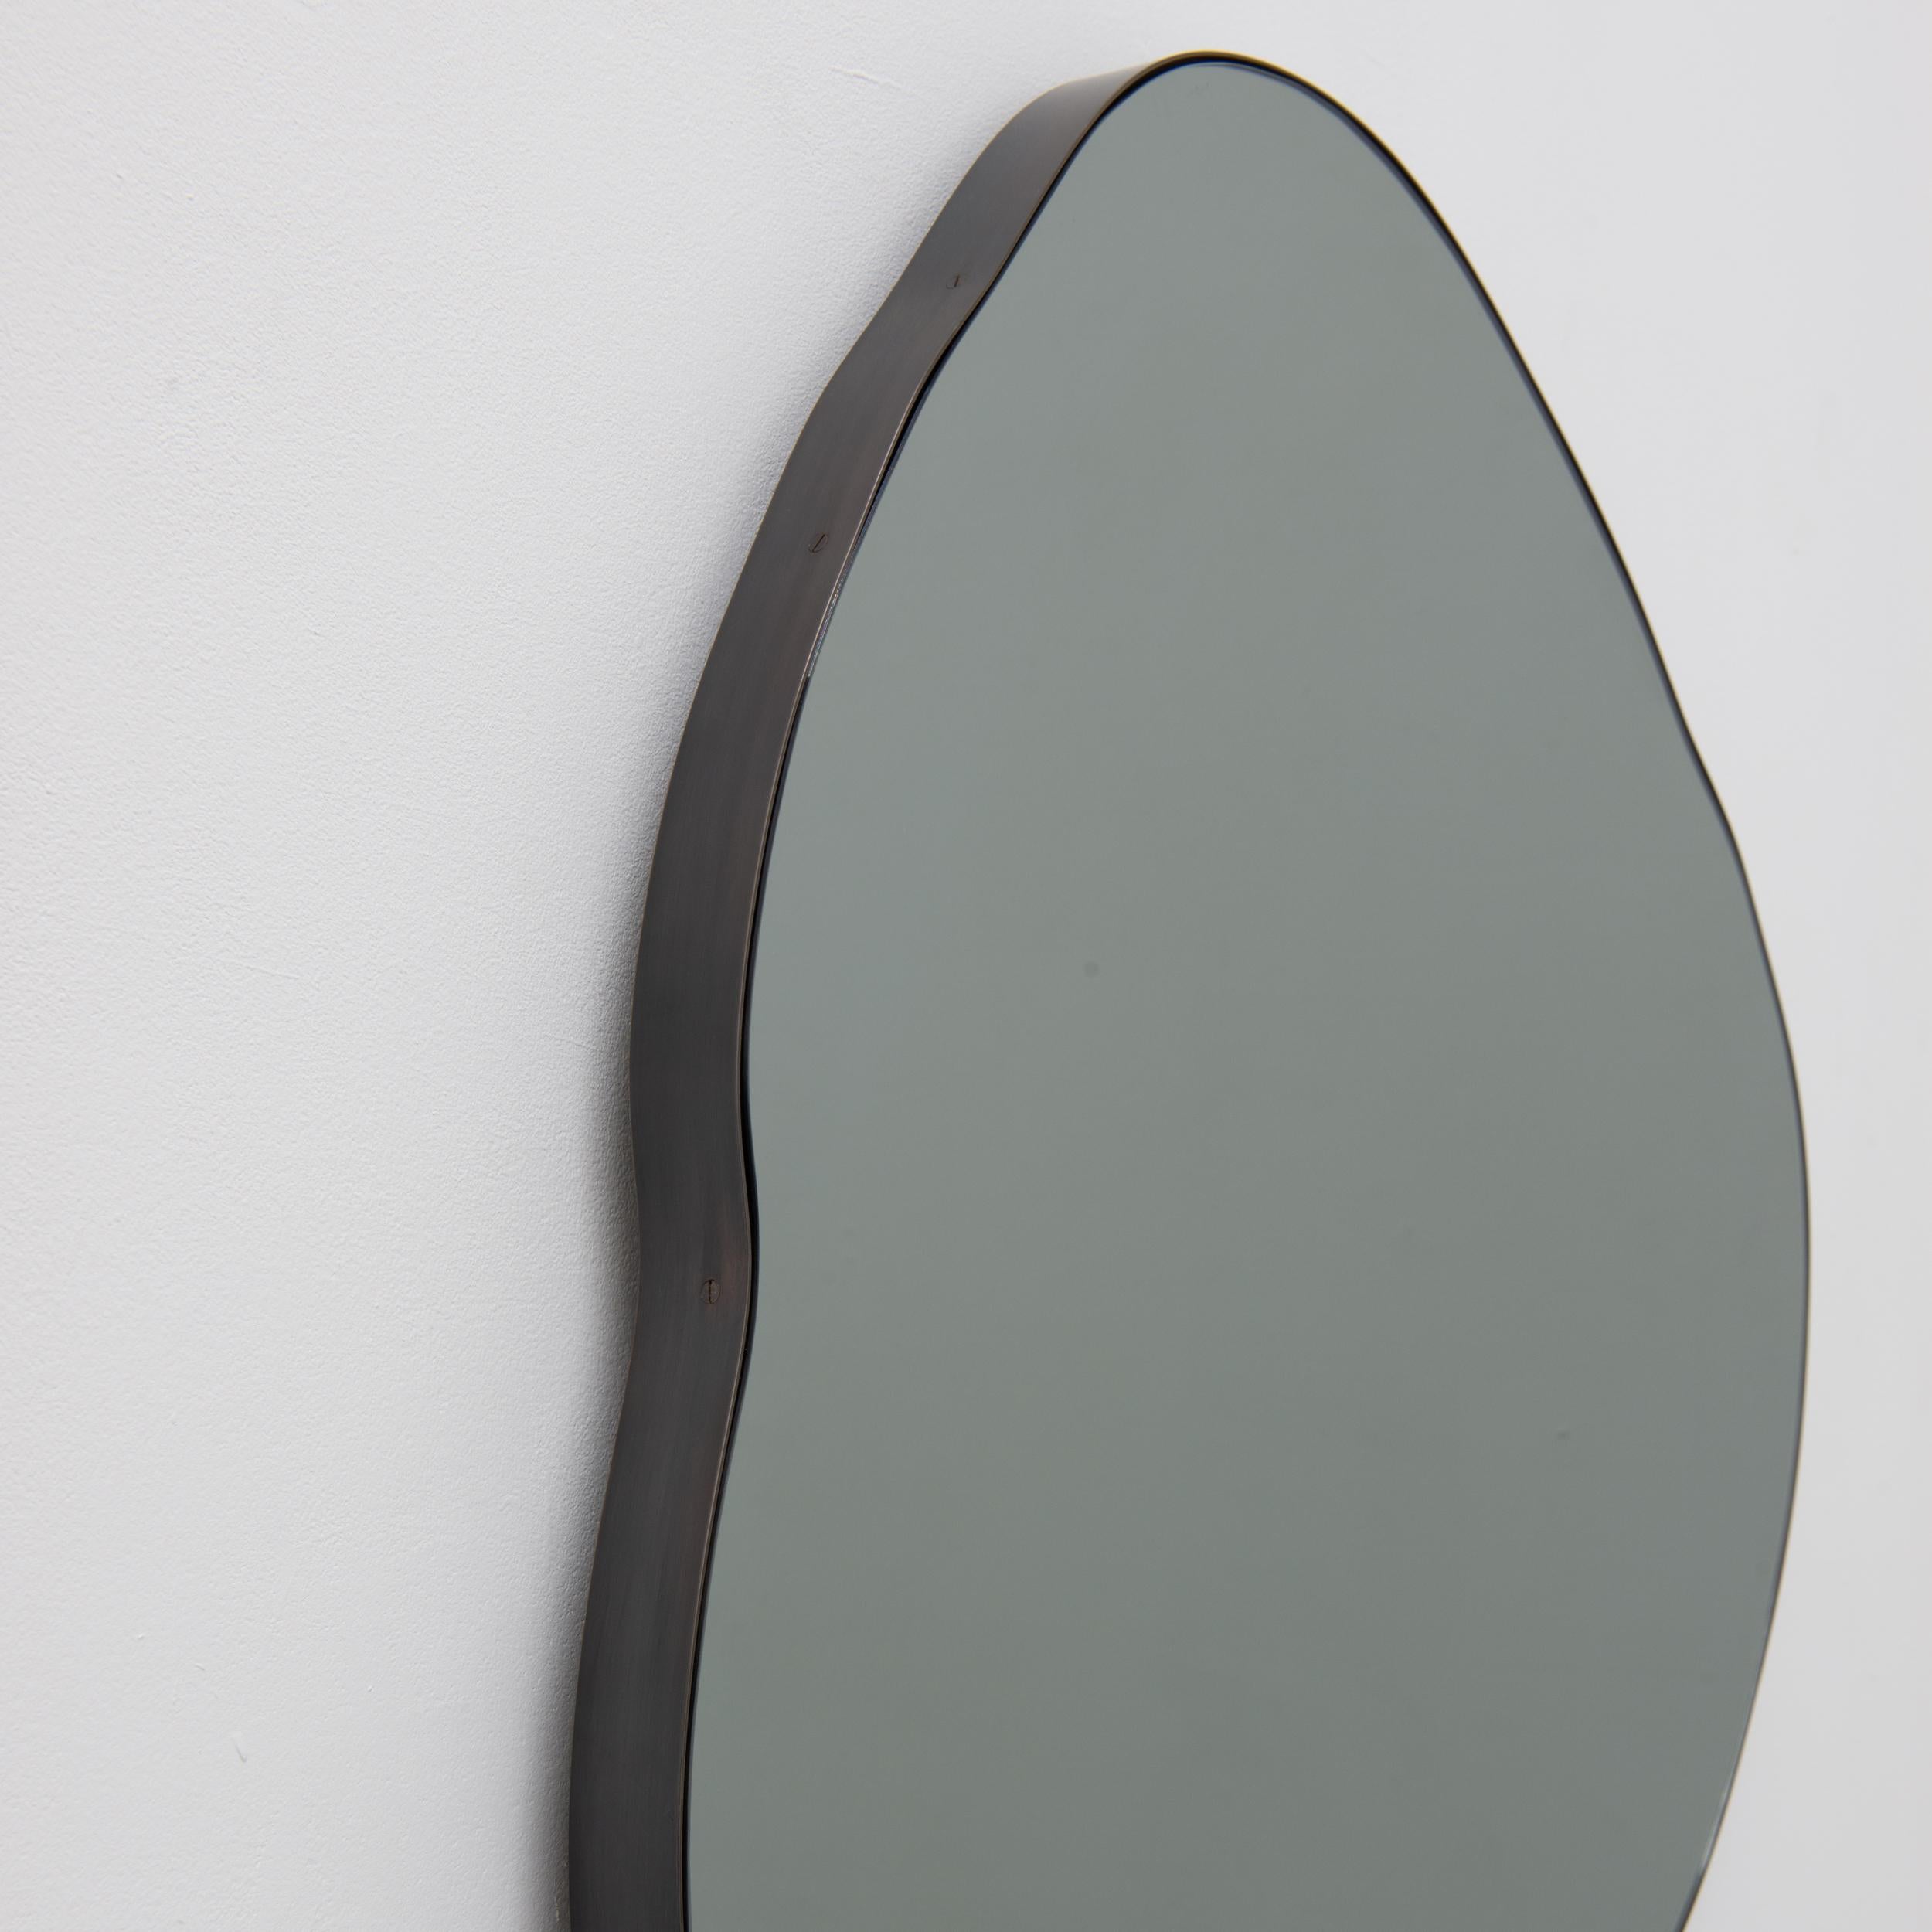 Ergon Organic Freeform Illuminated Black Mirror, Bronze Patina Frame, Large In New Condition For Sale In London, GB